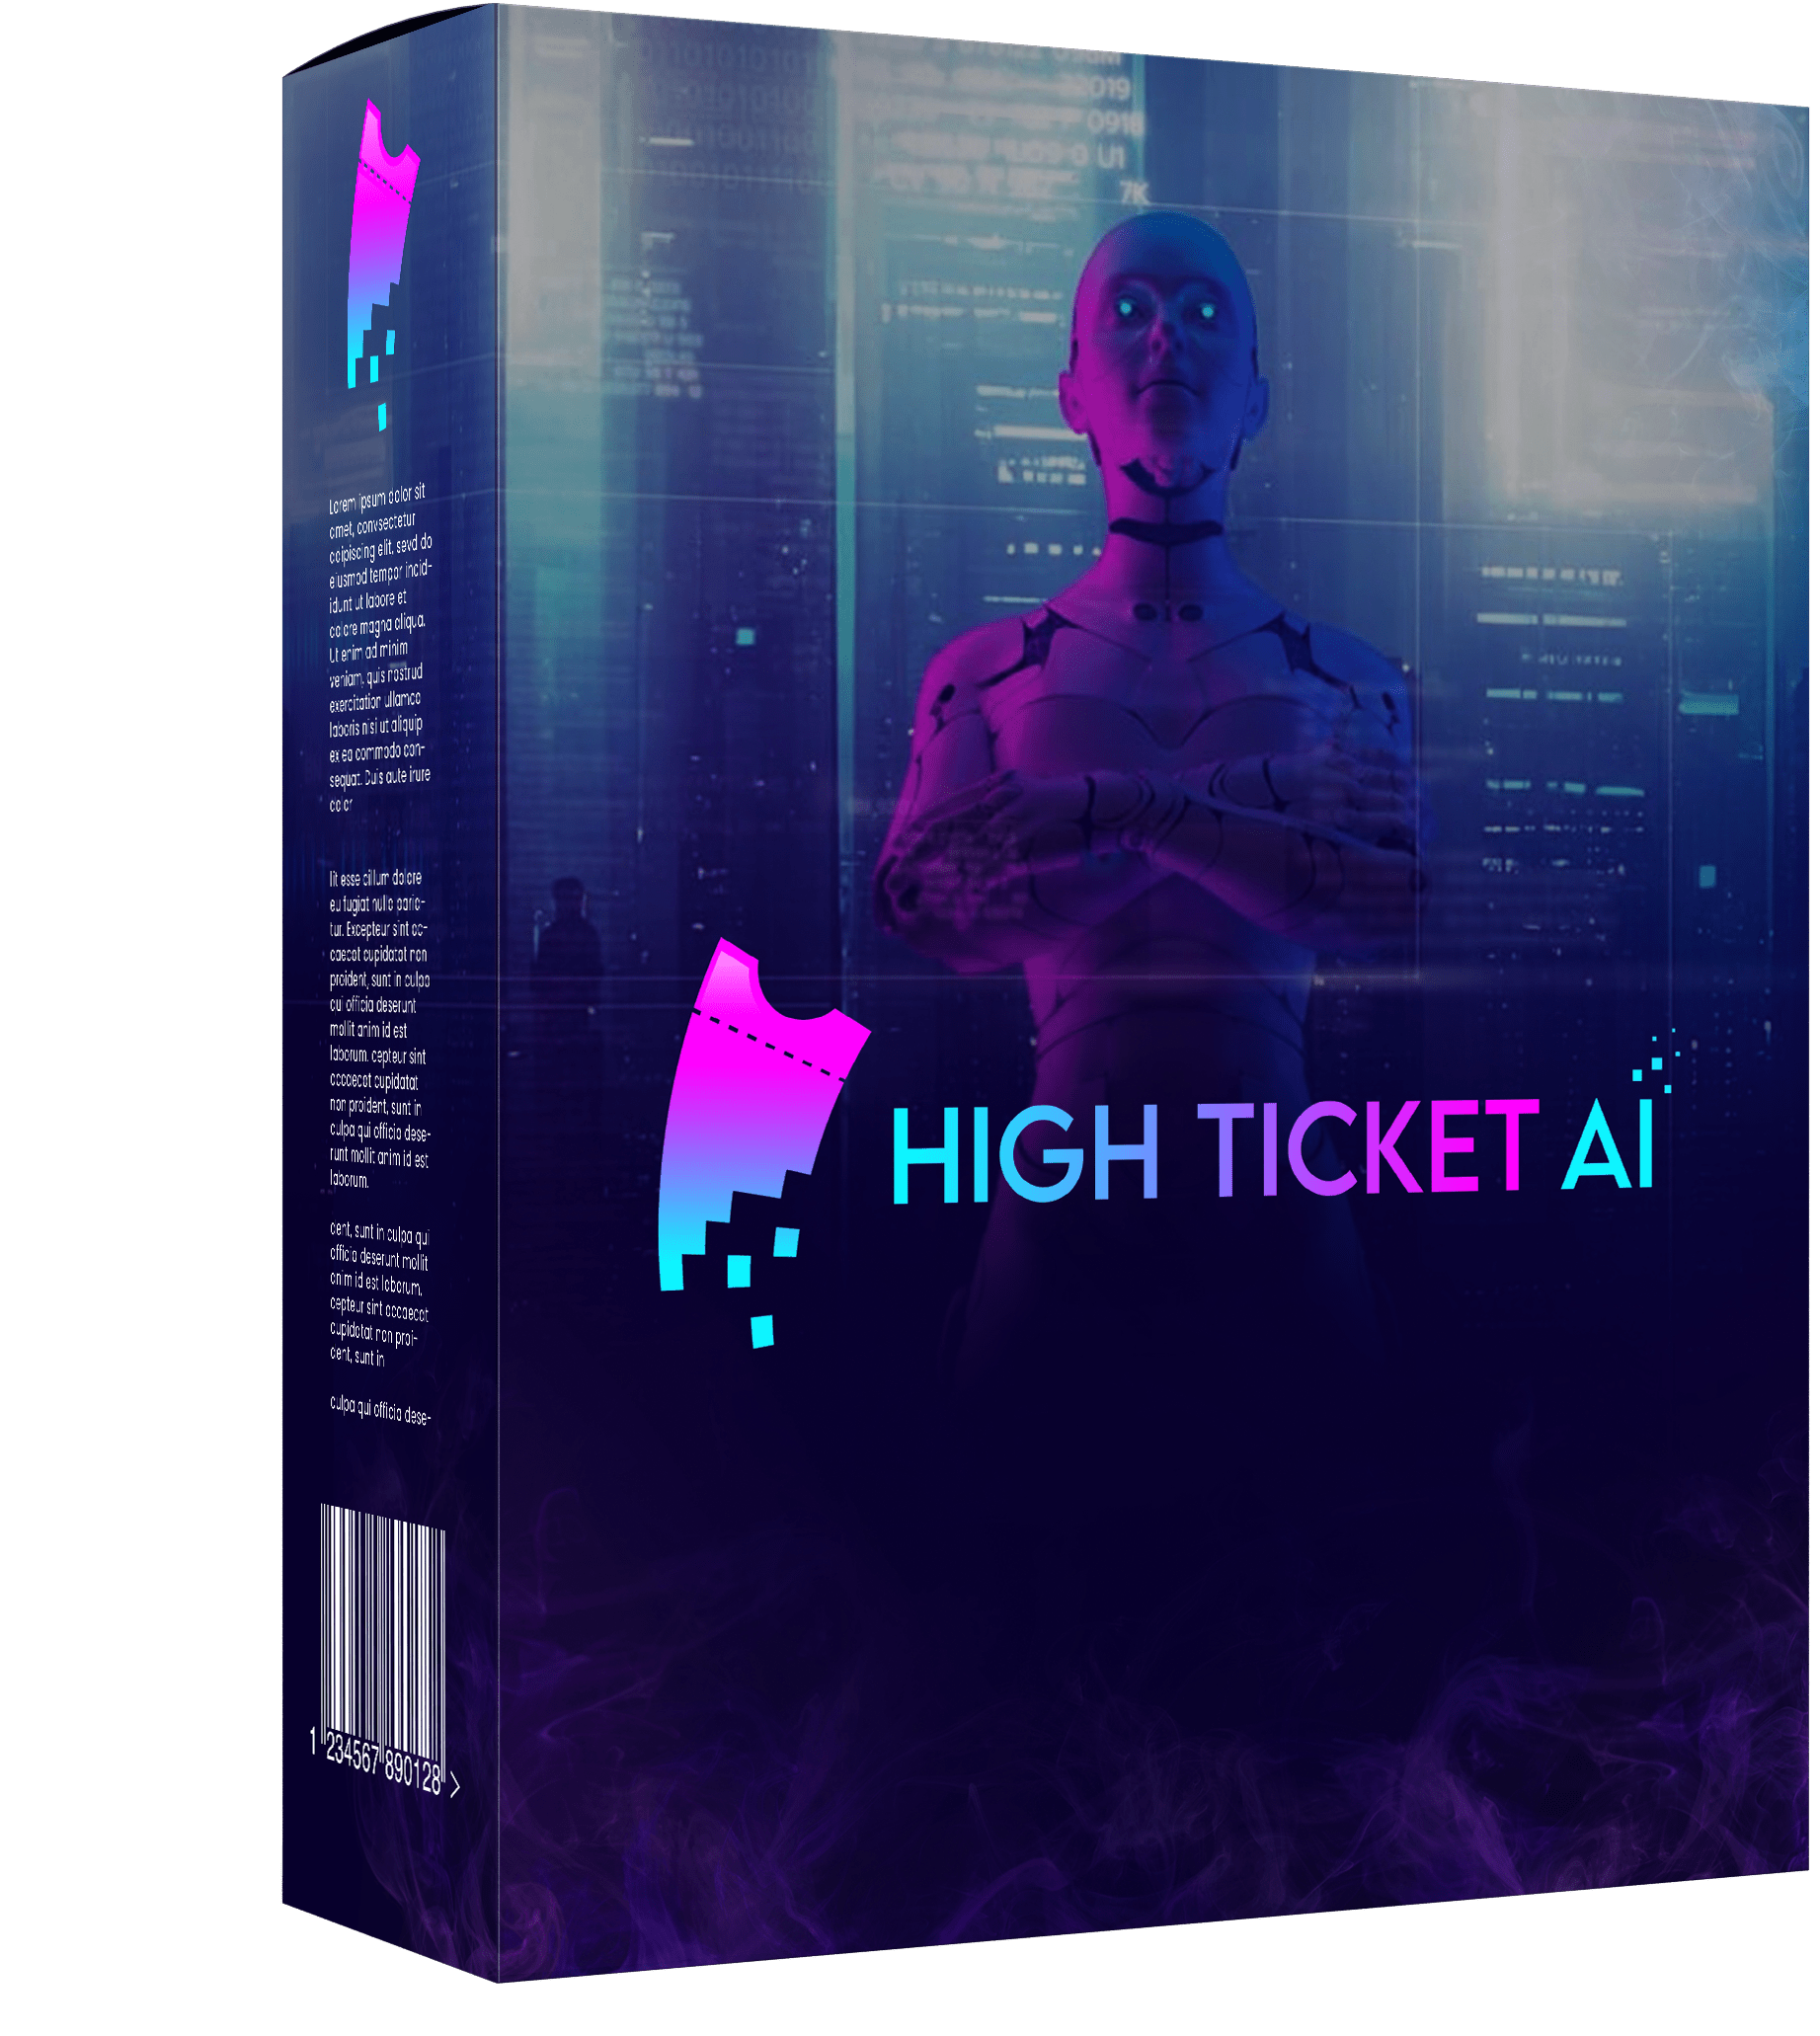 Exploring High-Value Applications of Artificial Intelligence: The Rise of High-Ticket A.I.